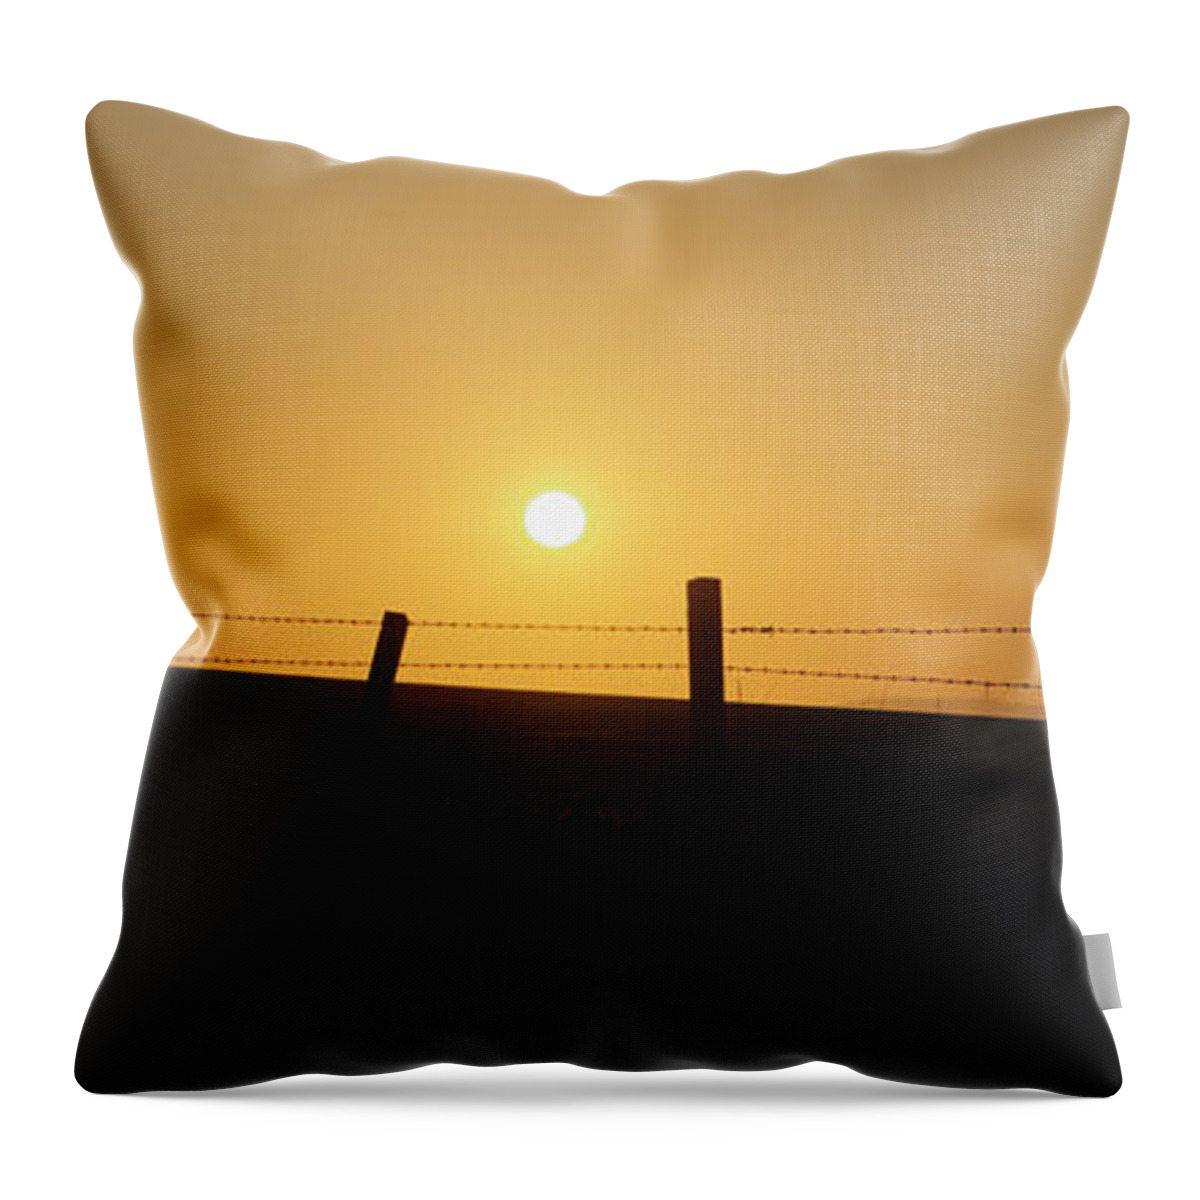 Landscape Throw Pillow featuring the photograph Sunset On The Farm by Adrian Wale